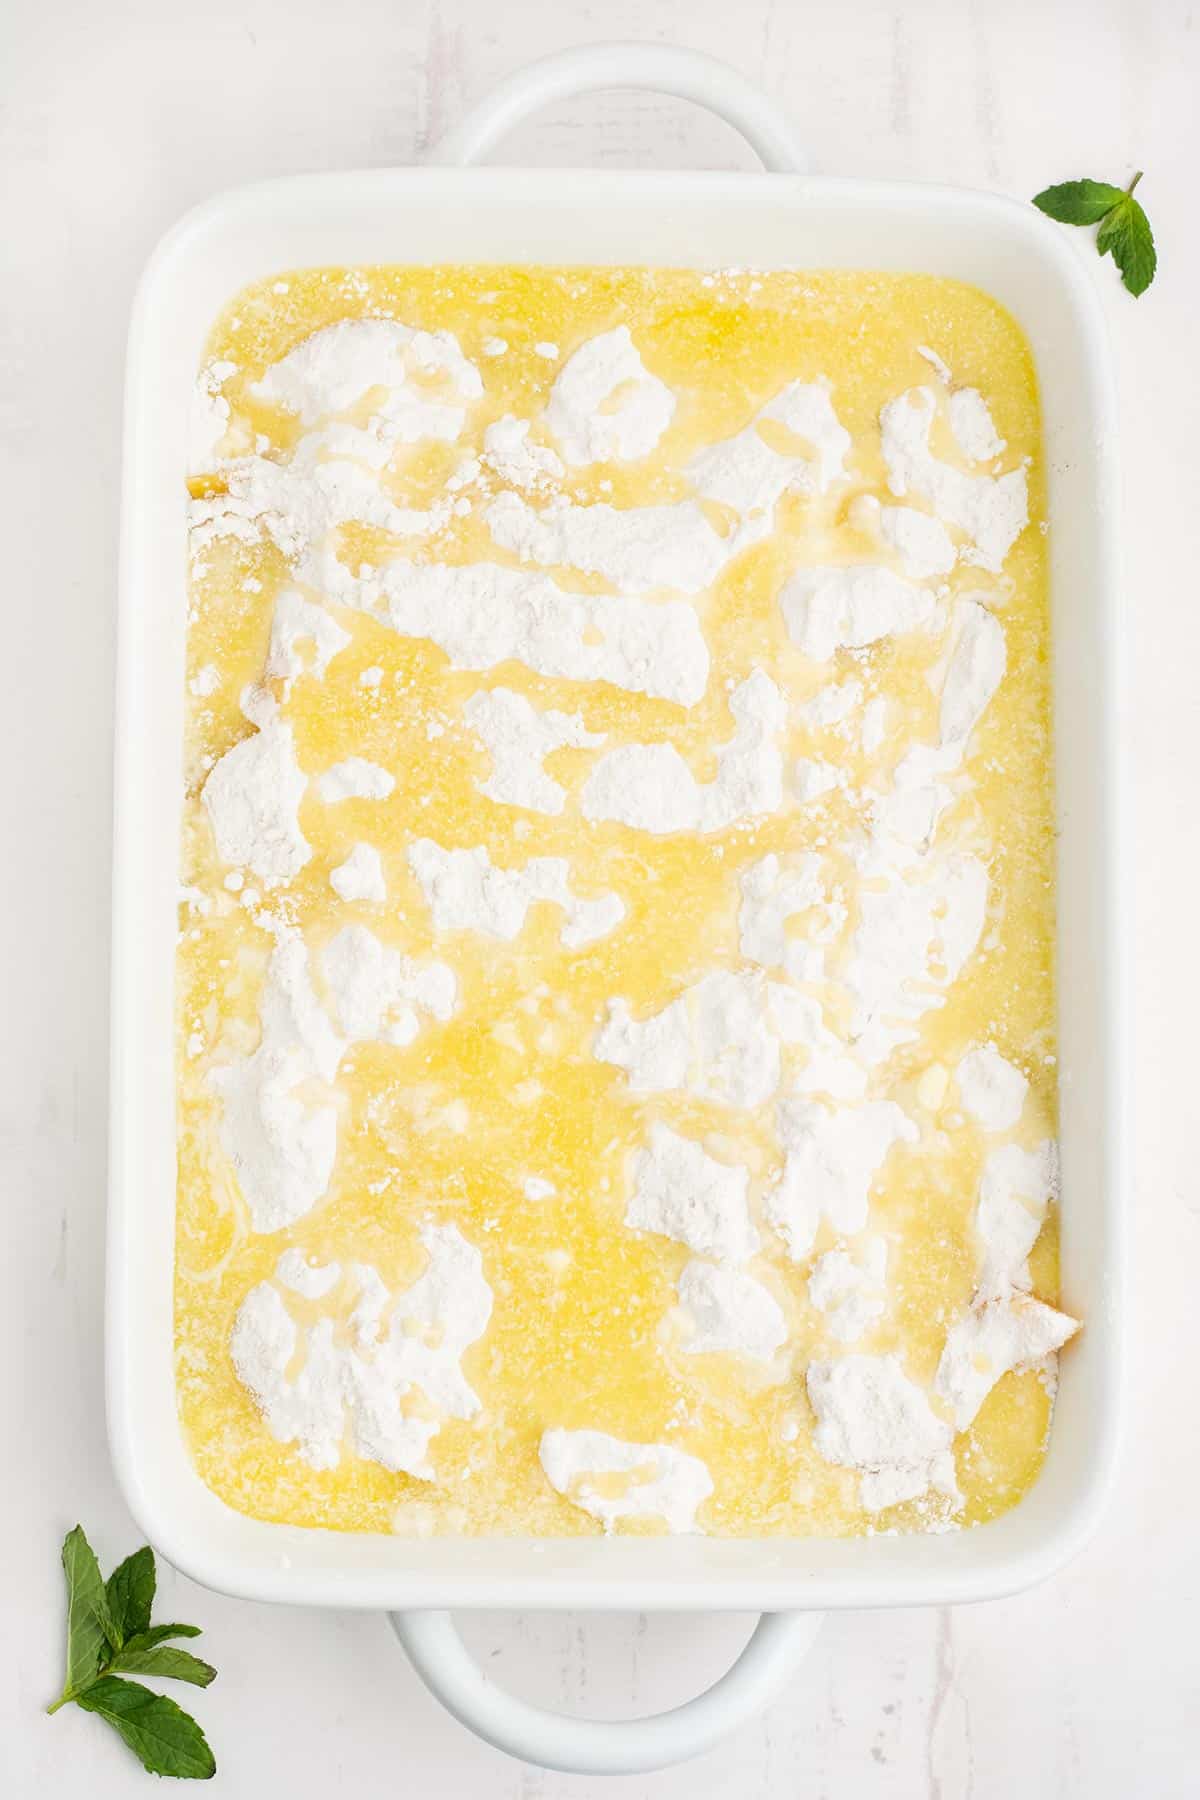 Butter drizzled over the top of the cake mix in the pan.